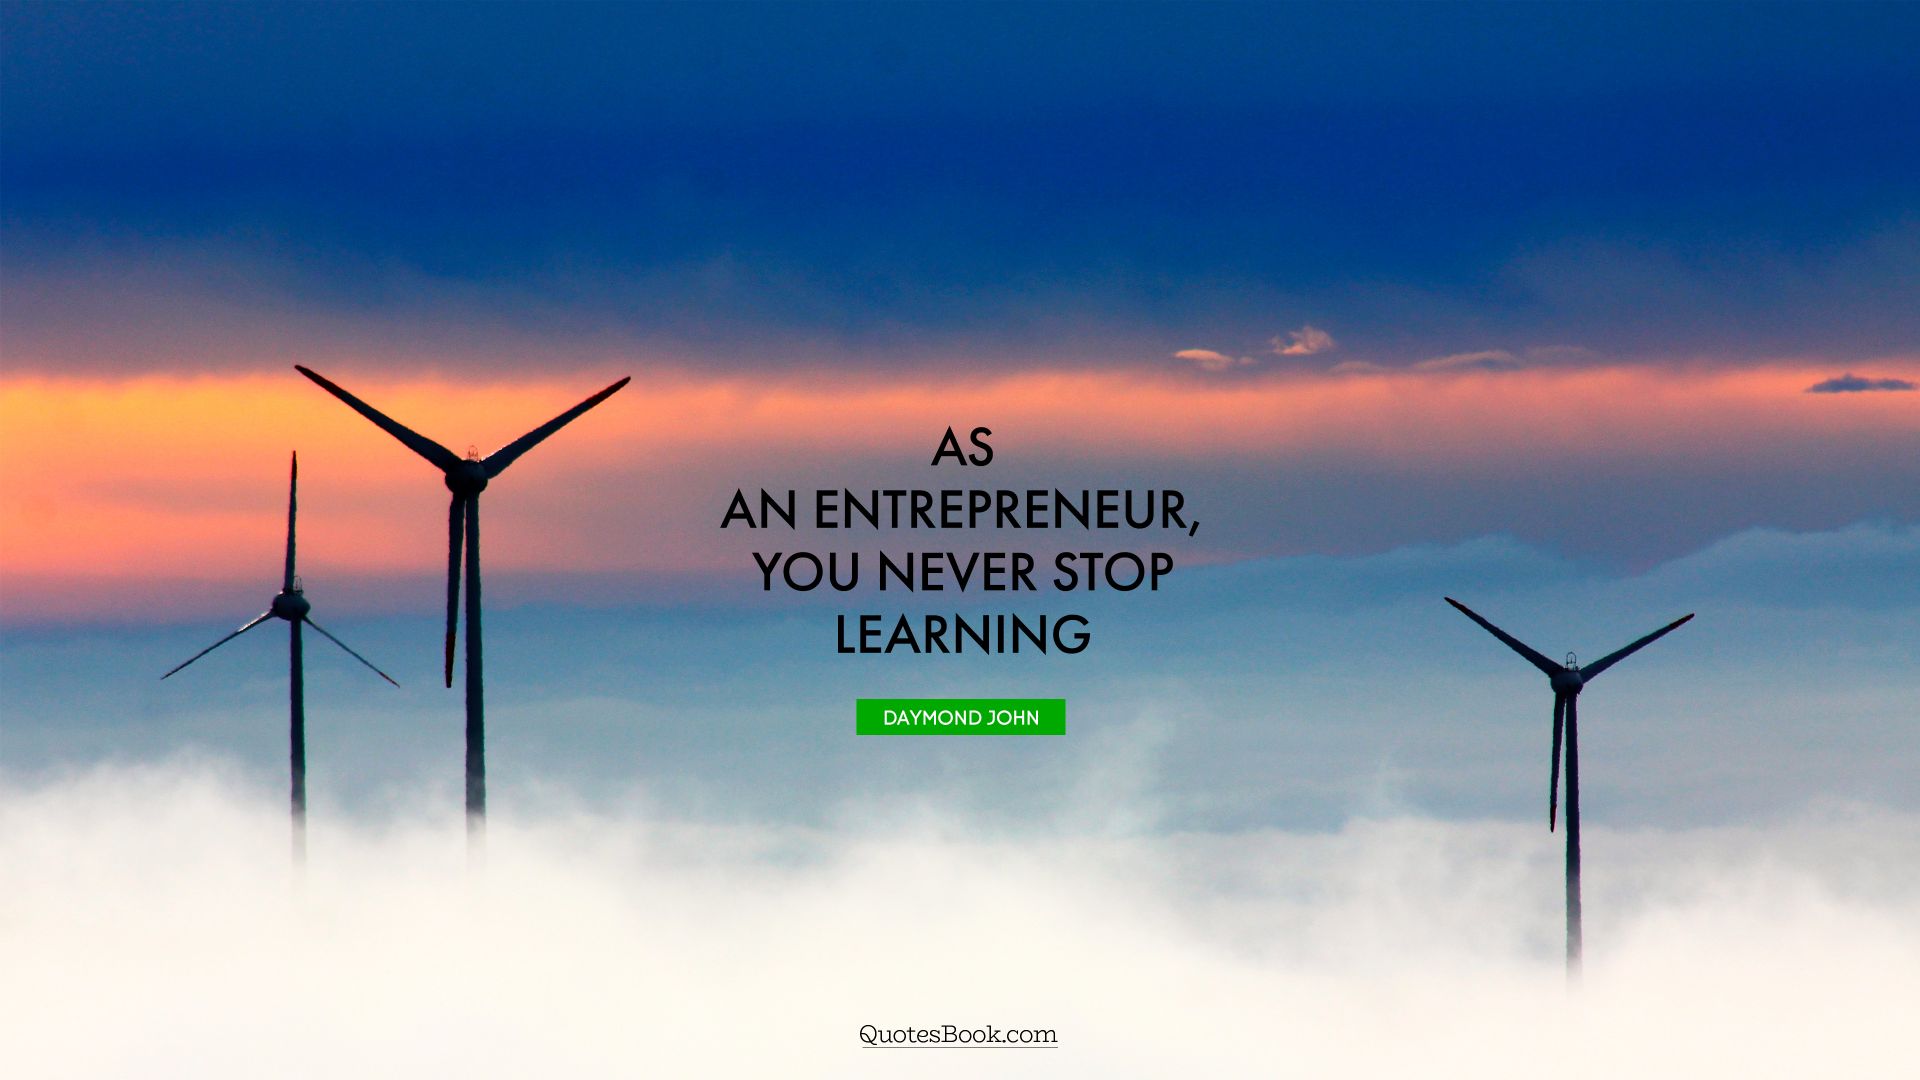 As an entrepreneur, you never stop learning . - Quote by Daymond John